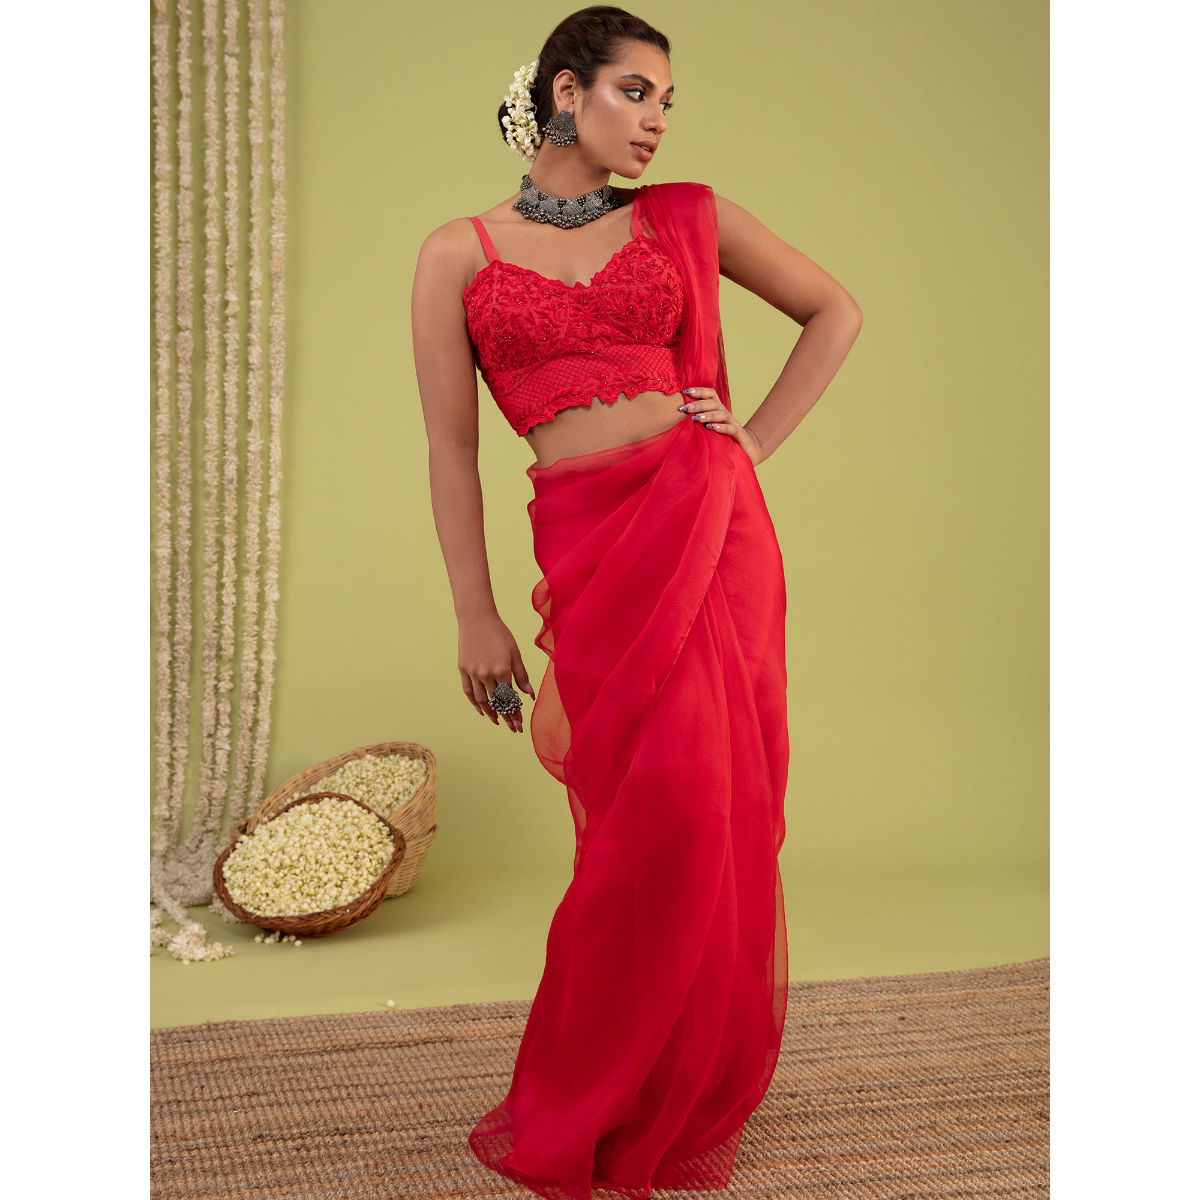 Gajra Gang by Nykaa Fashion Dreamy Red Saree With Stitched Blouse ...